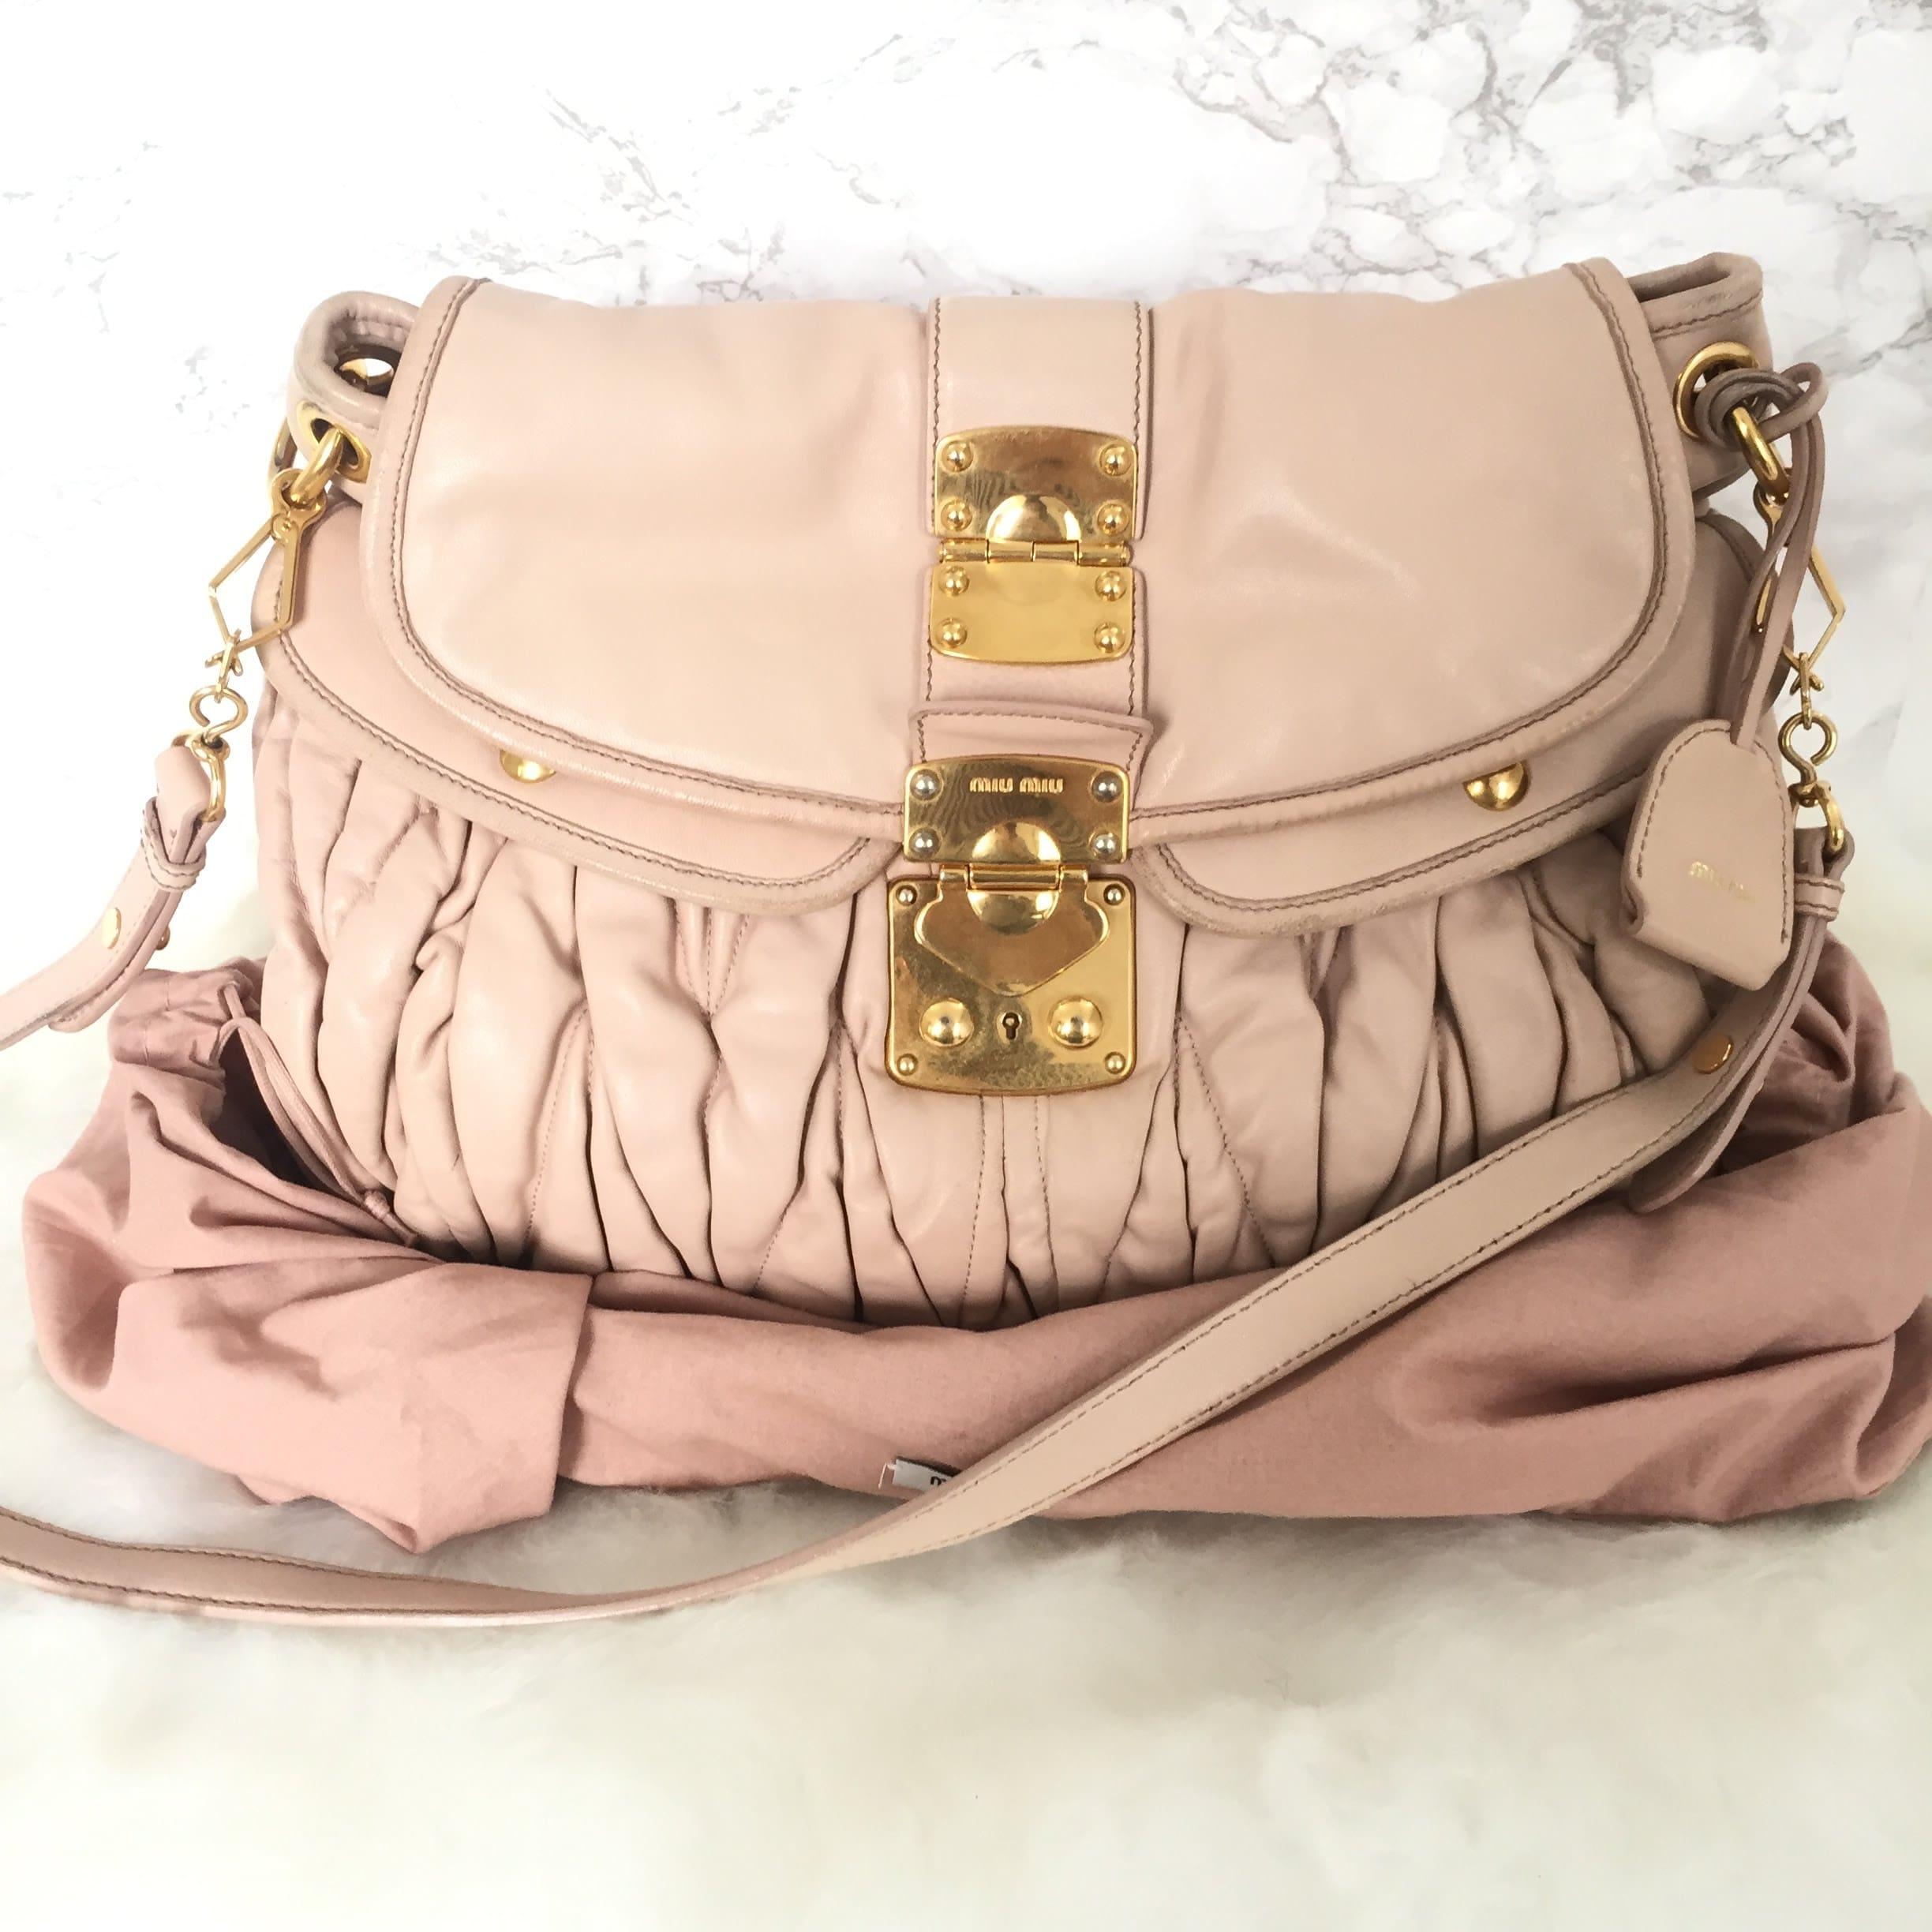 How to Wear Light Pink Miu Miu Bag - Search for Light Pink Miu Miu Bag